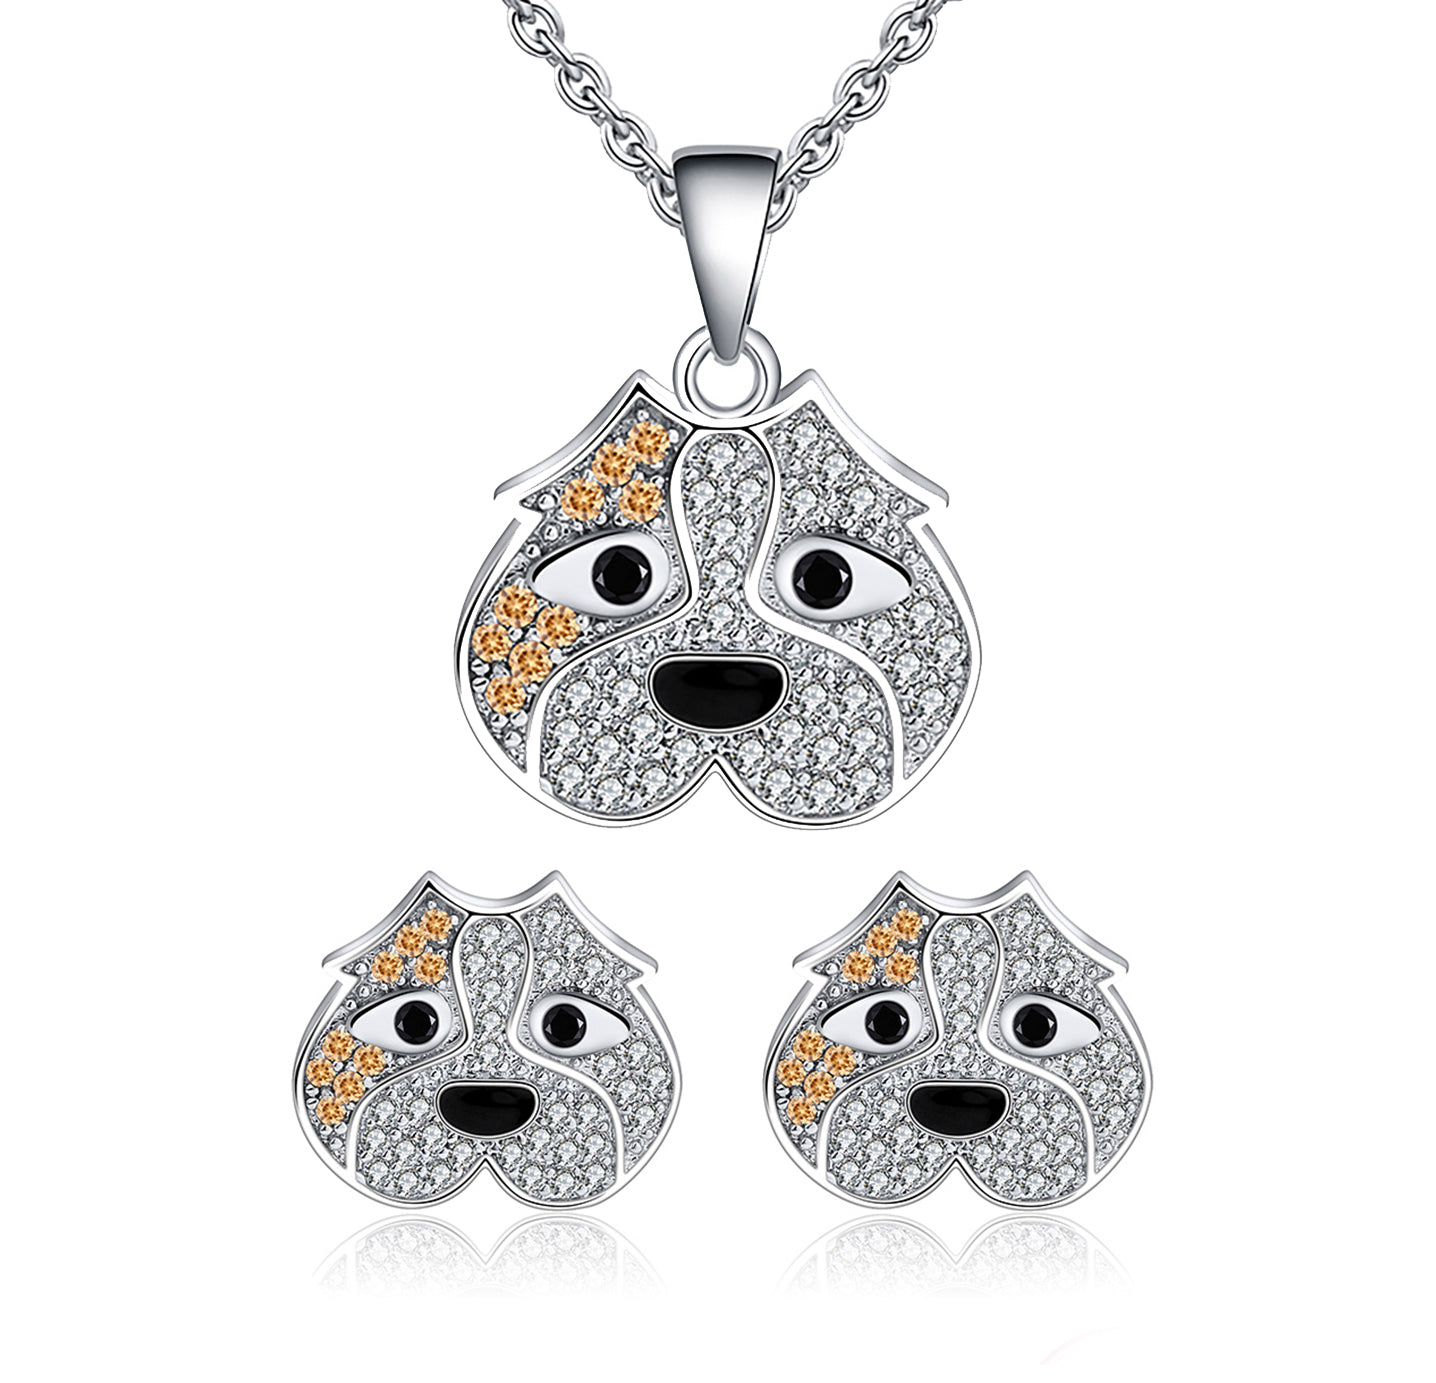 Pitbull Dog Necklace or Earrings Sterling Silver Cz Pendant Ginger Lyne - Necklace